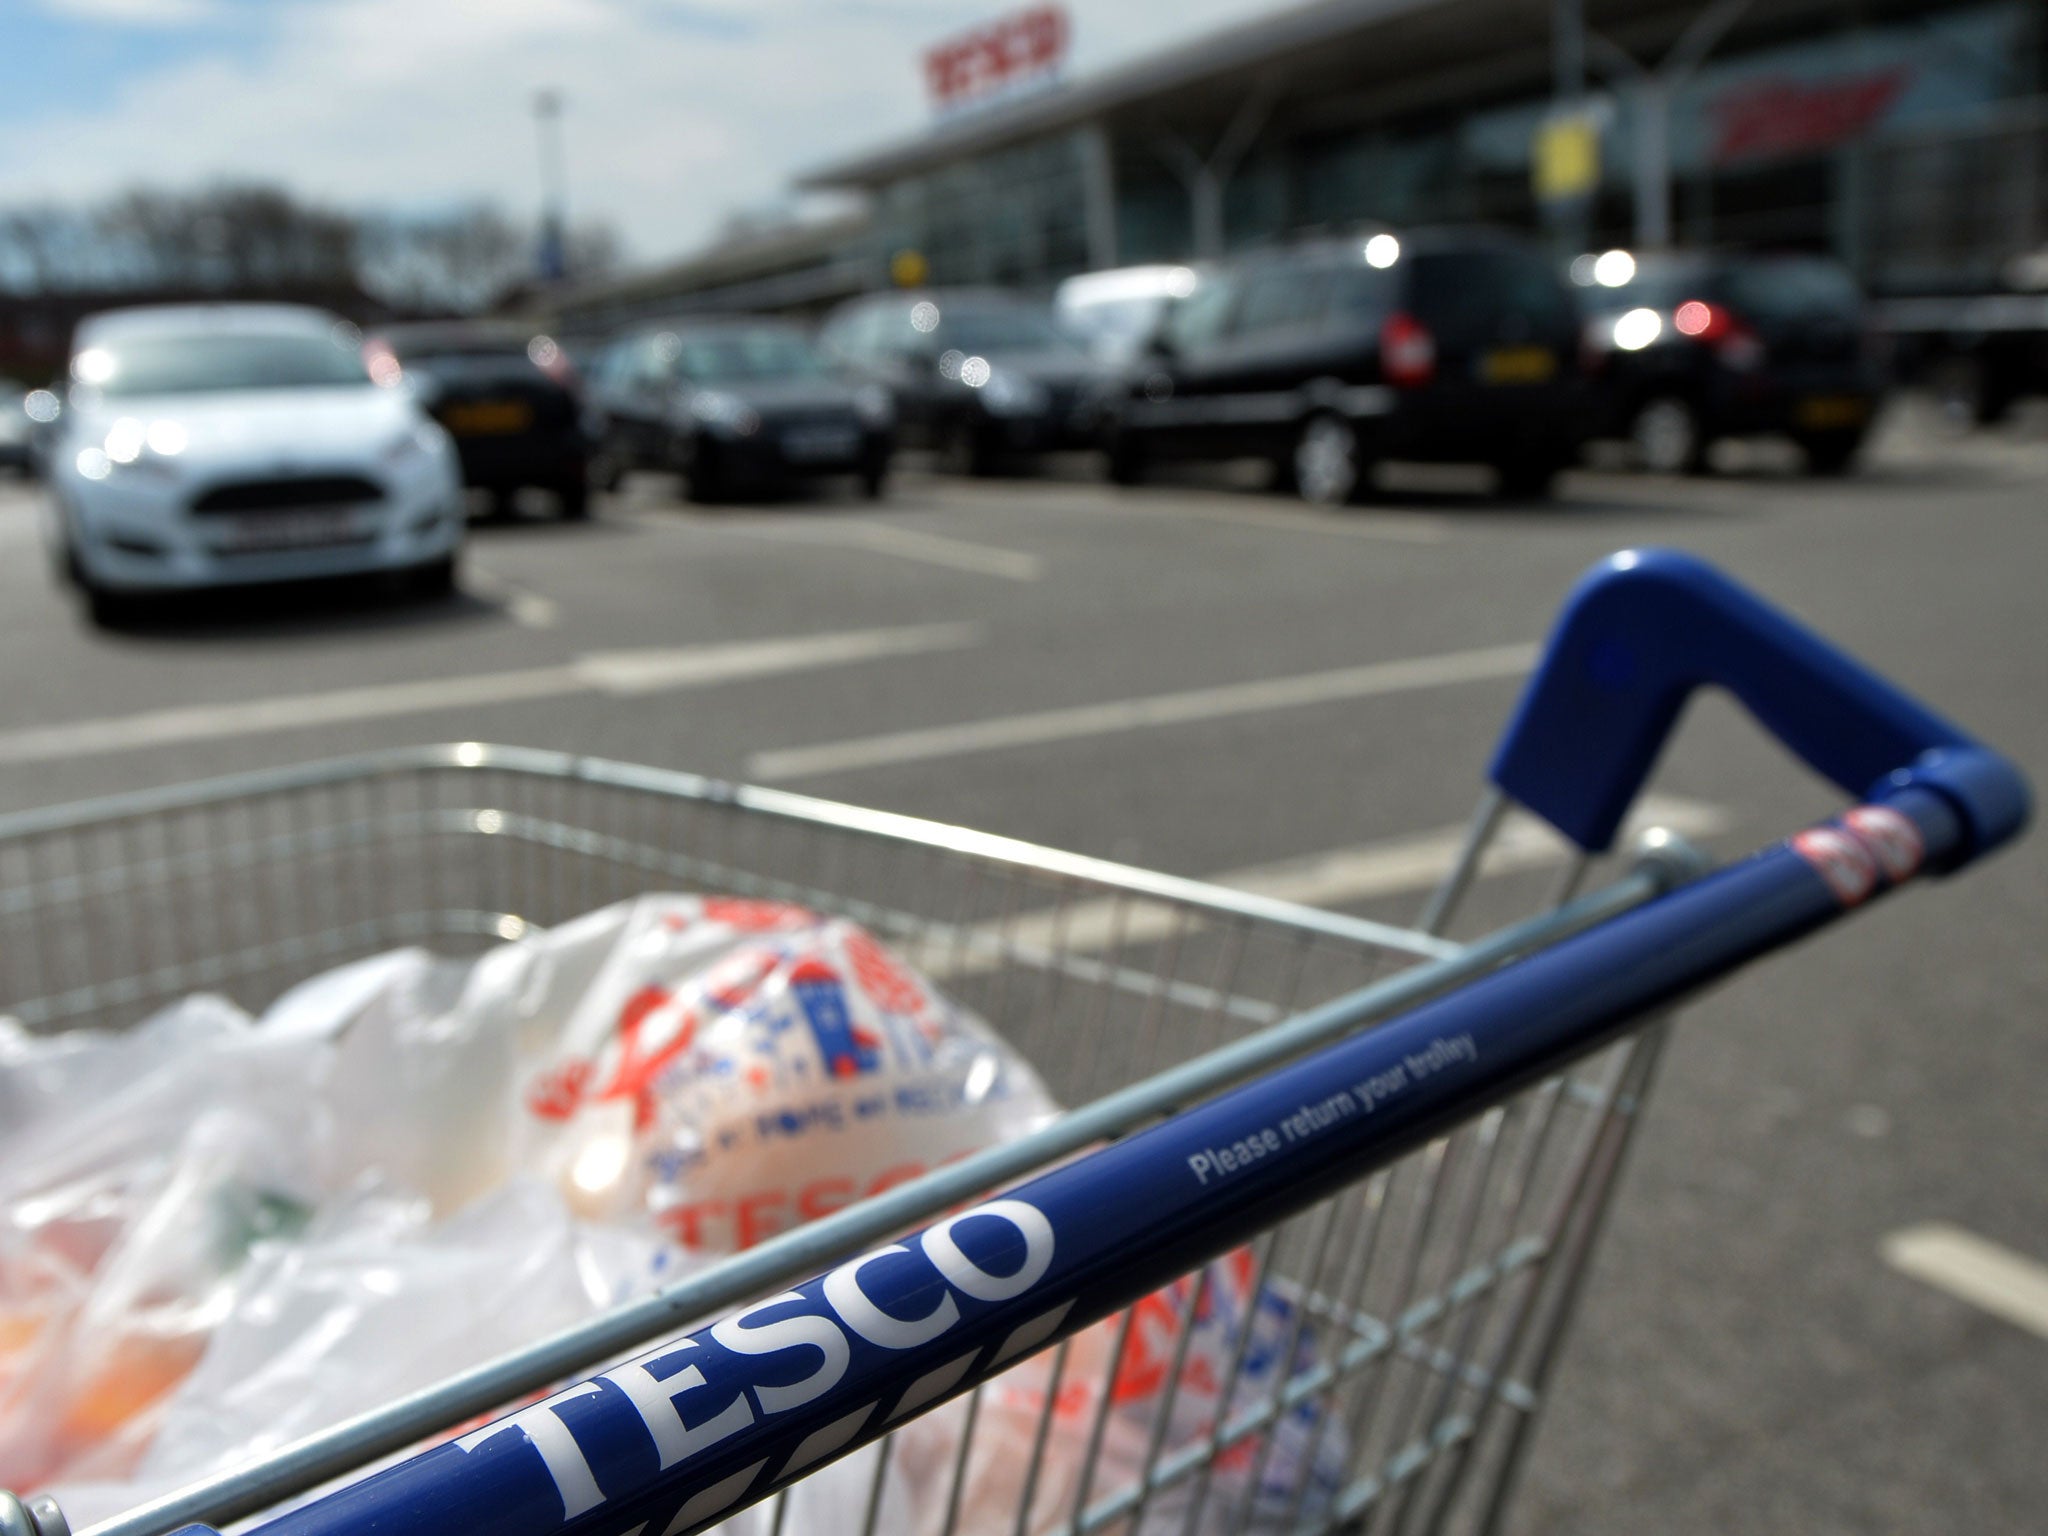 A picture shows a trolly of shopping a Tesco store in Liverpool, north west England on April 16, 2014. Supermarket giant Tesco announced a second drop in annual profits in a row on April 16, leaving Britain's biggest retailer hoping that recent expansion